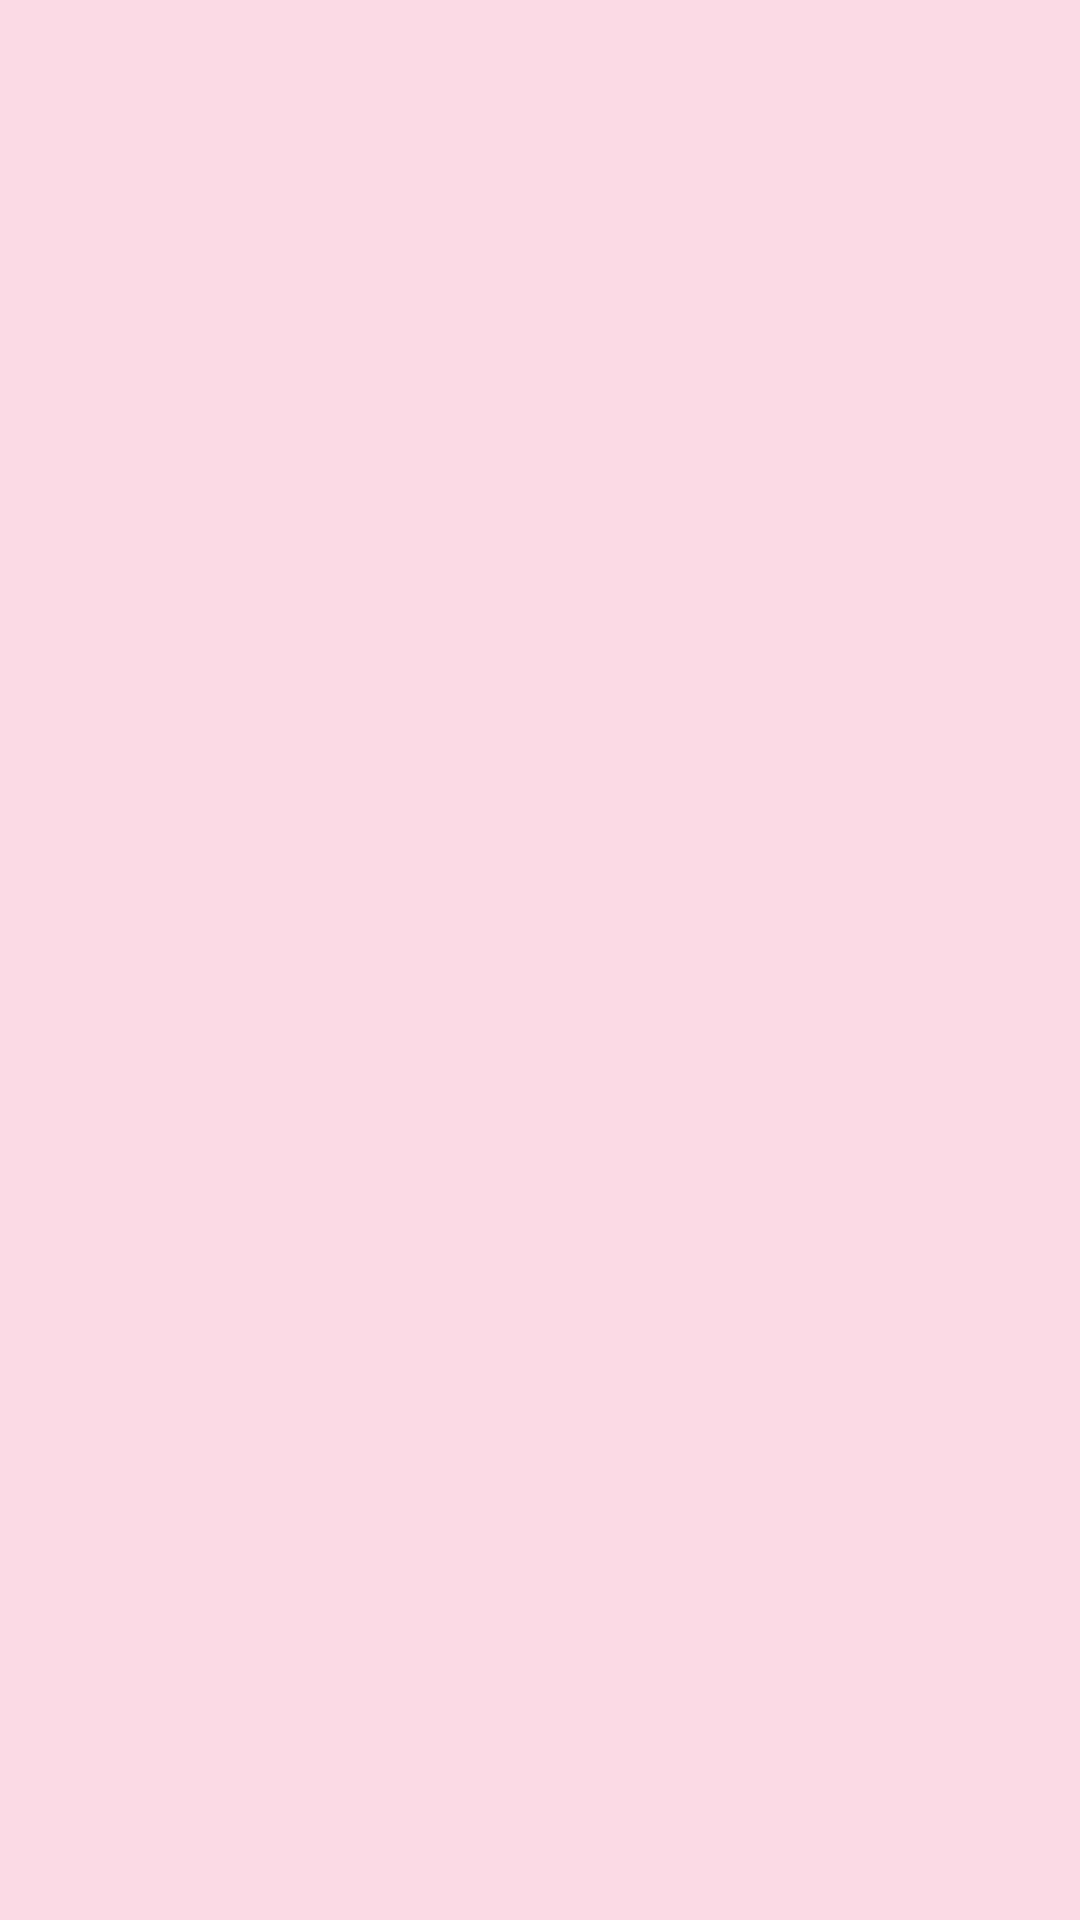 a pink background with a white line